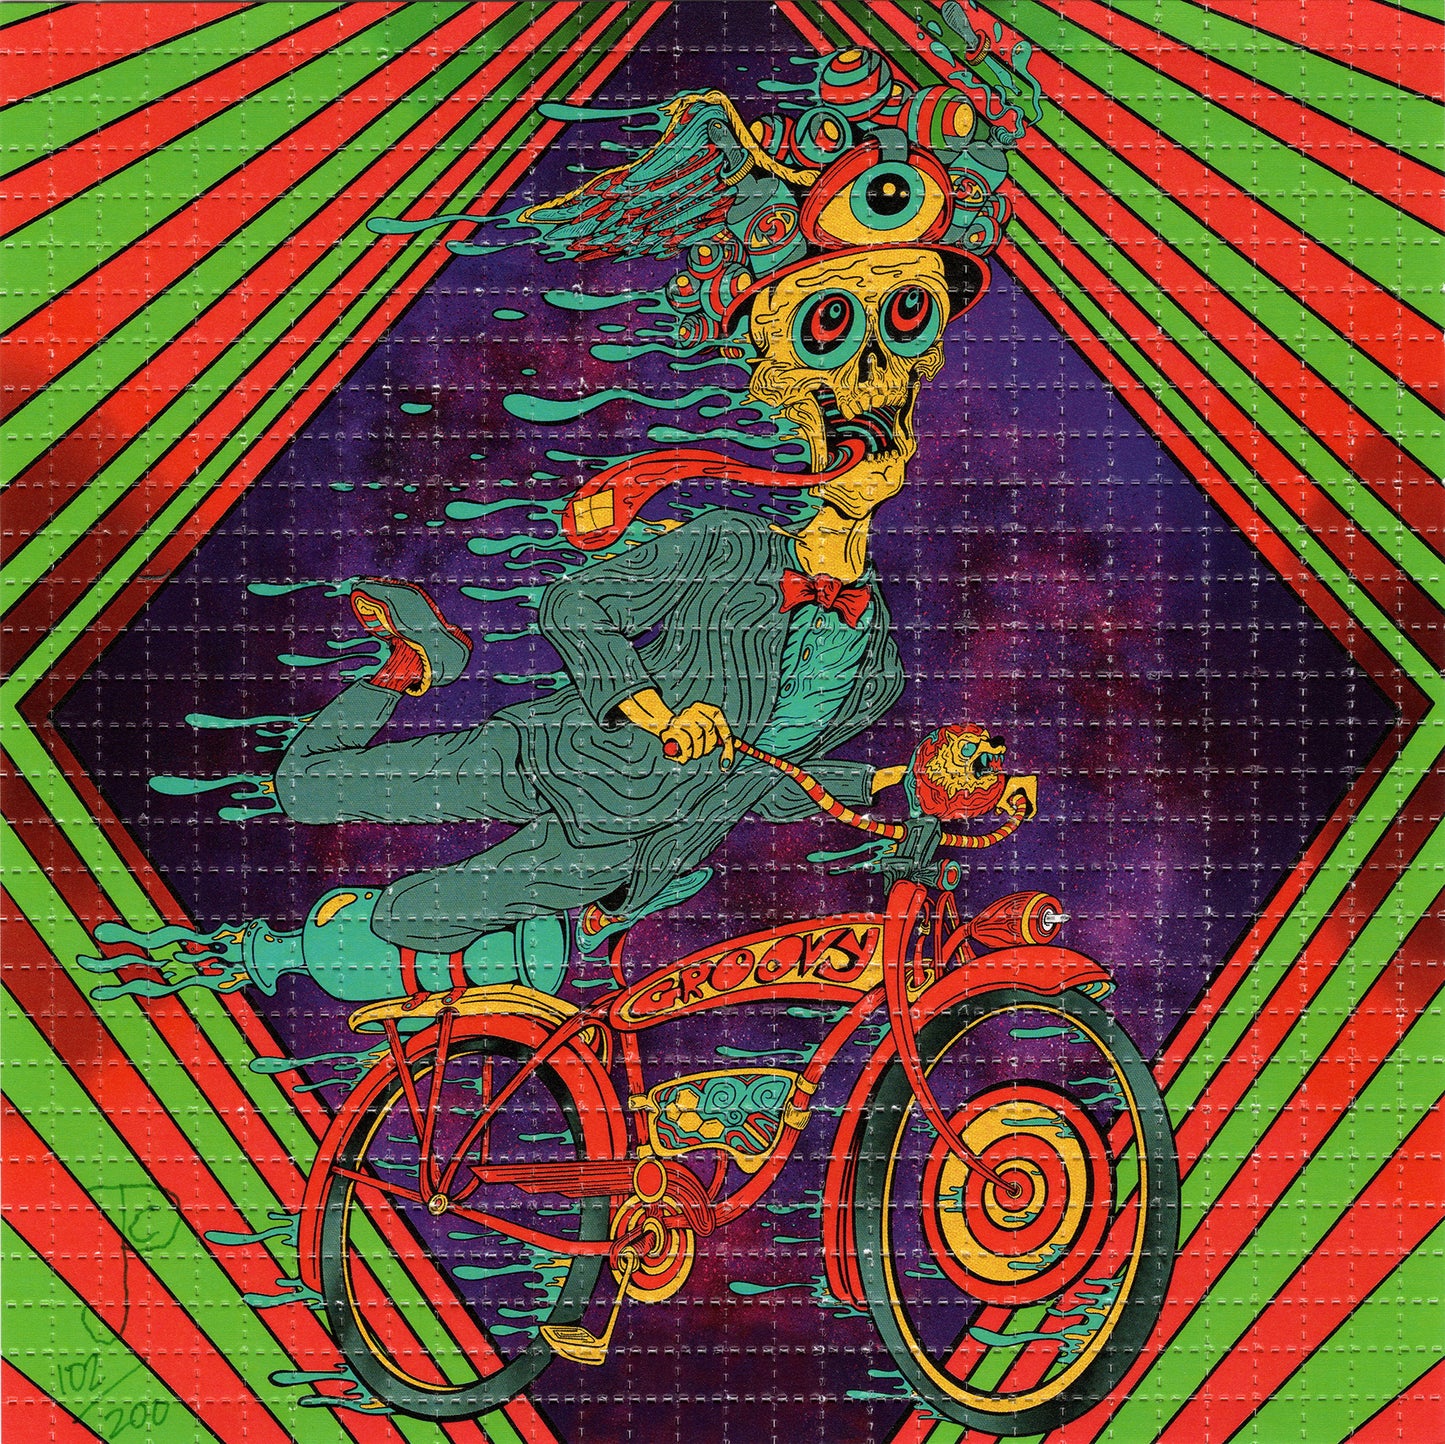 Pee Wee Bicycle Day  by Jason Portante Signed Limited Edition LSD blotter art print